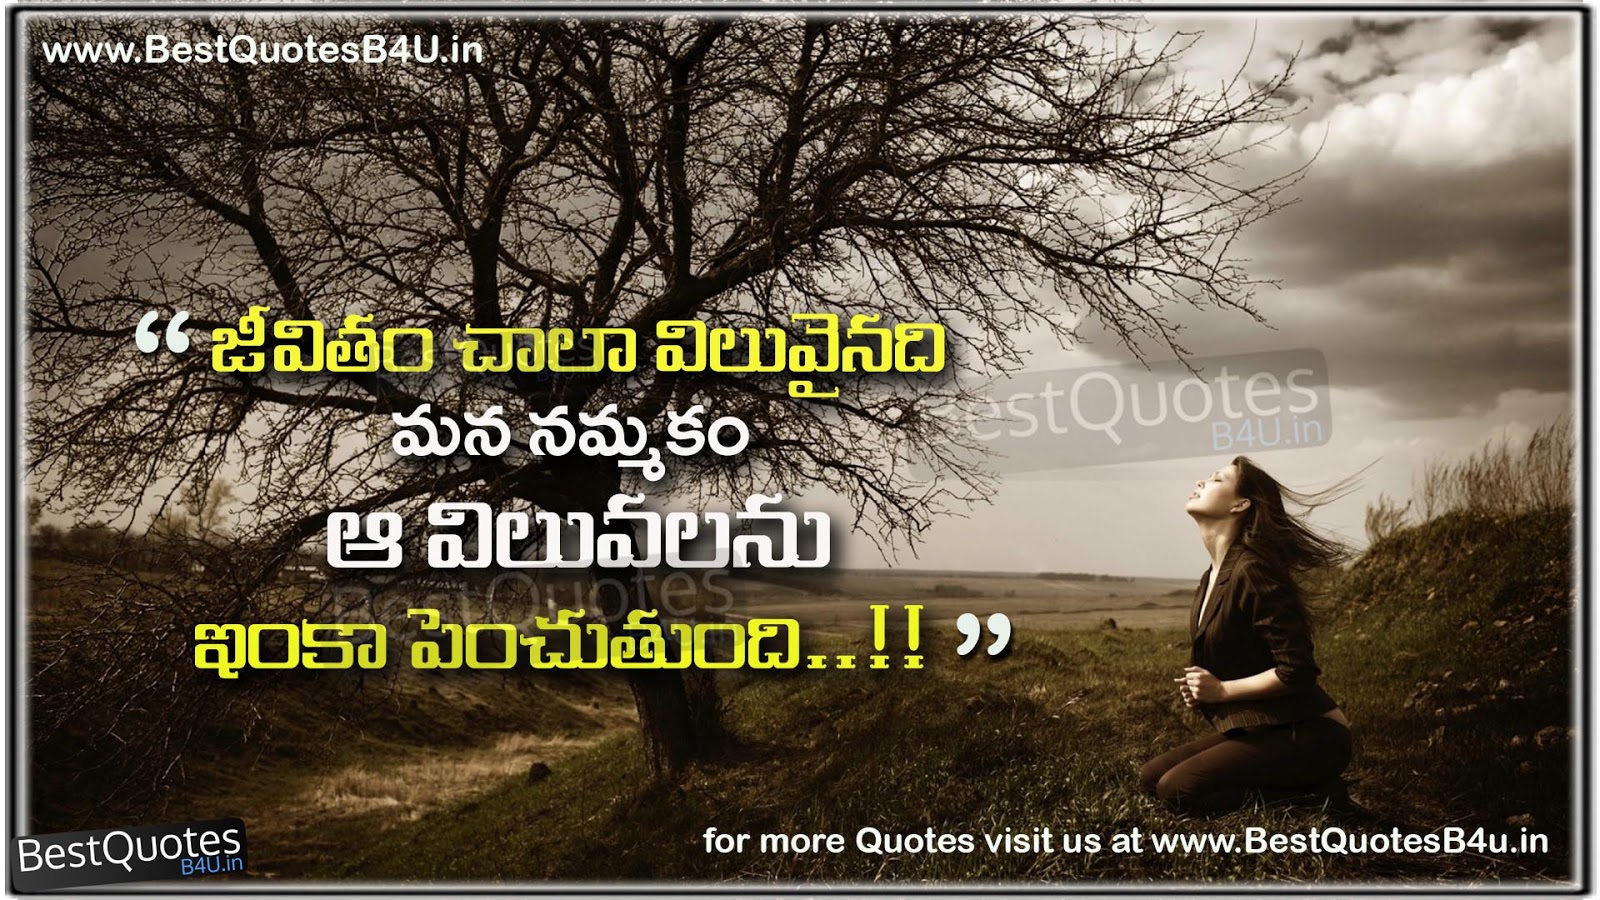 beautiful Telugu life quotes with hd wallpapers